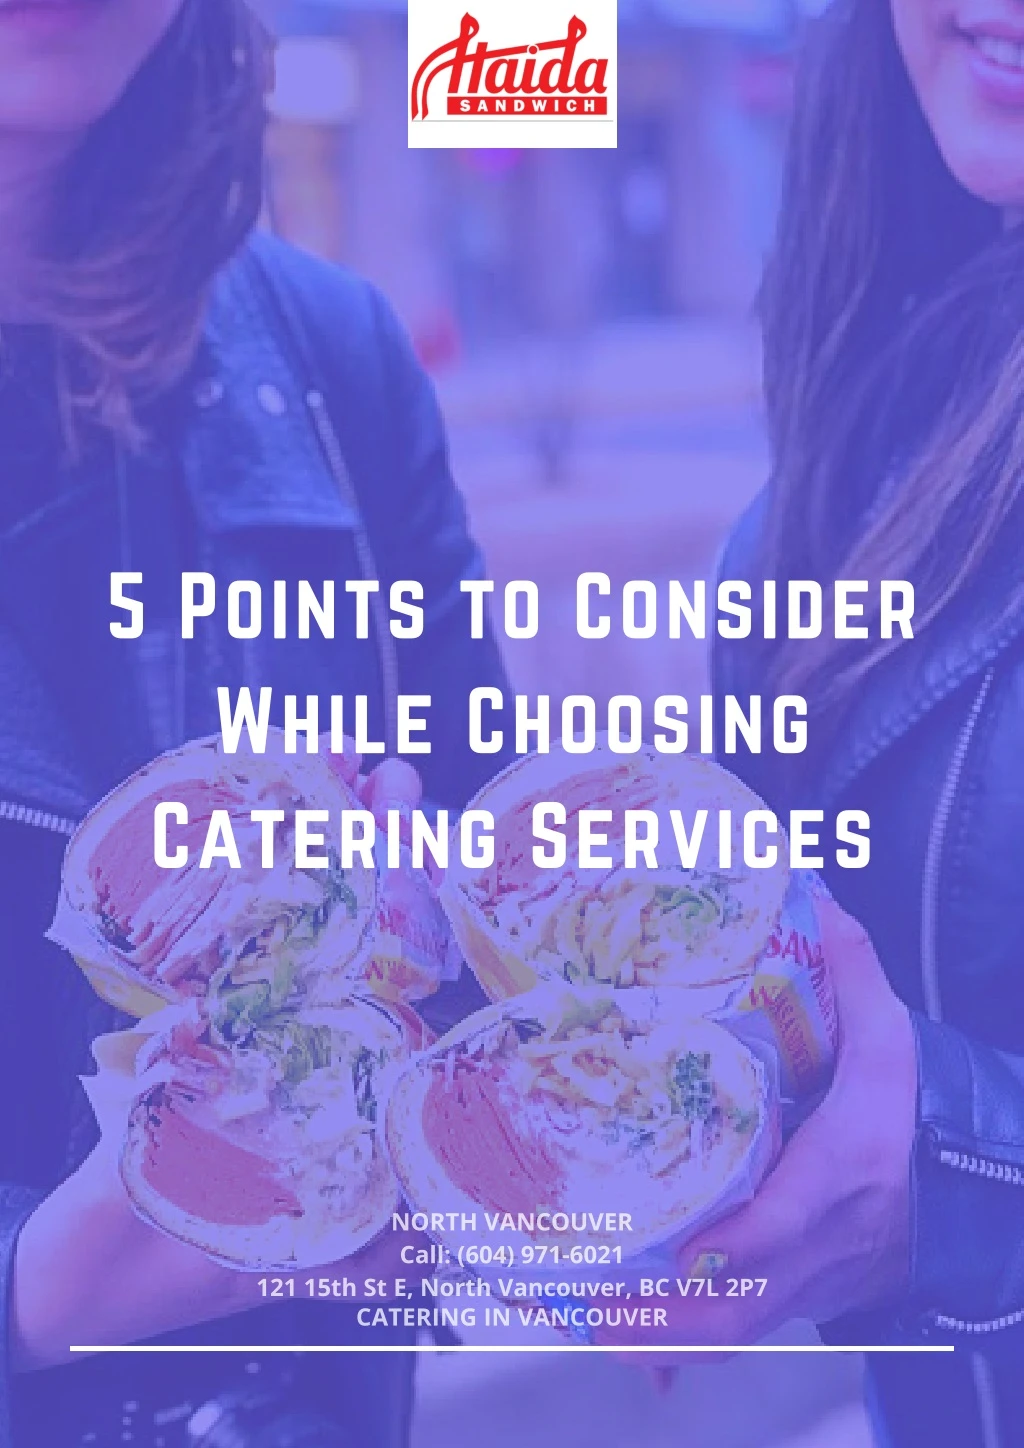 5 points to consider while choosing catering